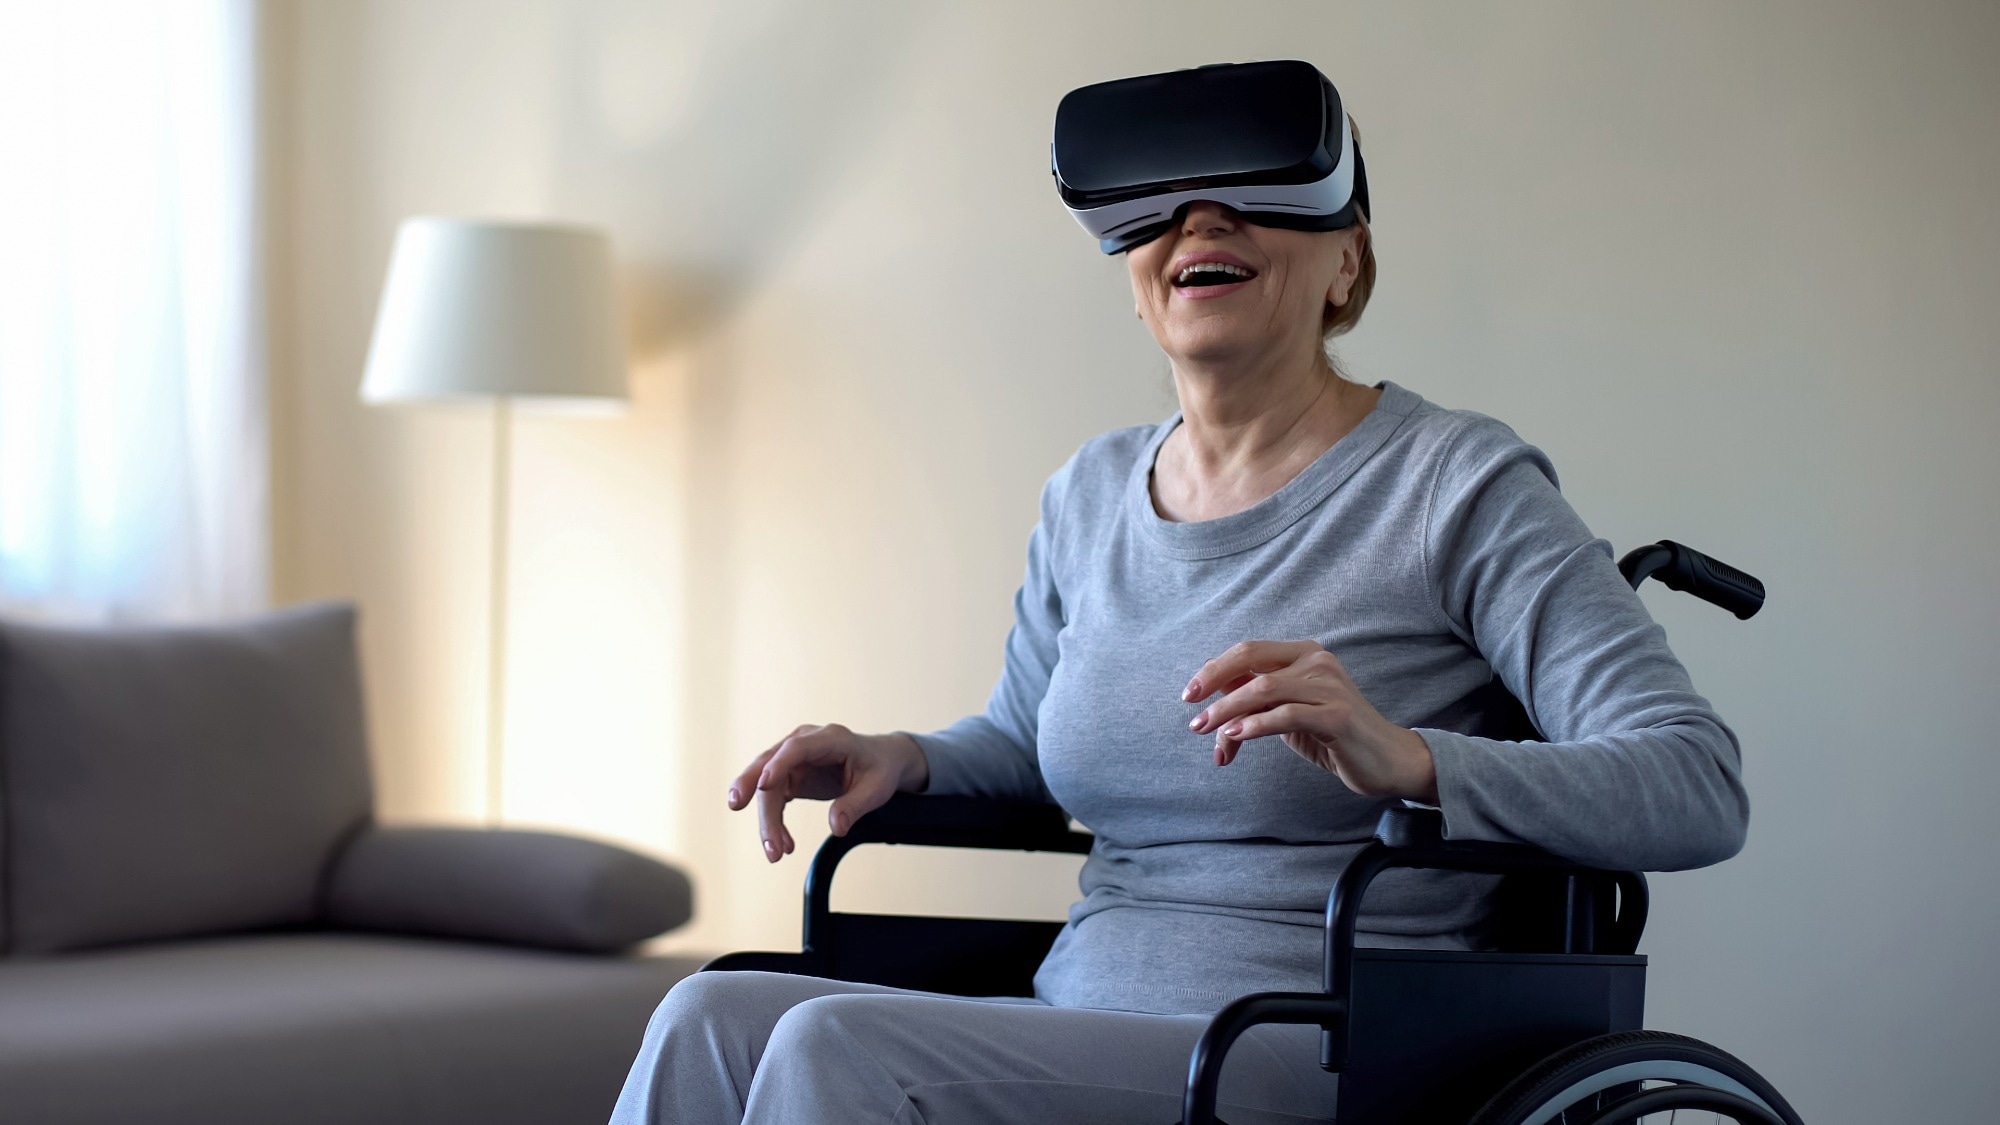 Effectiveness and safety of virtual reality rehabilitation after stroke: an overview of systematic reviews